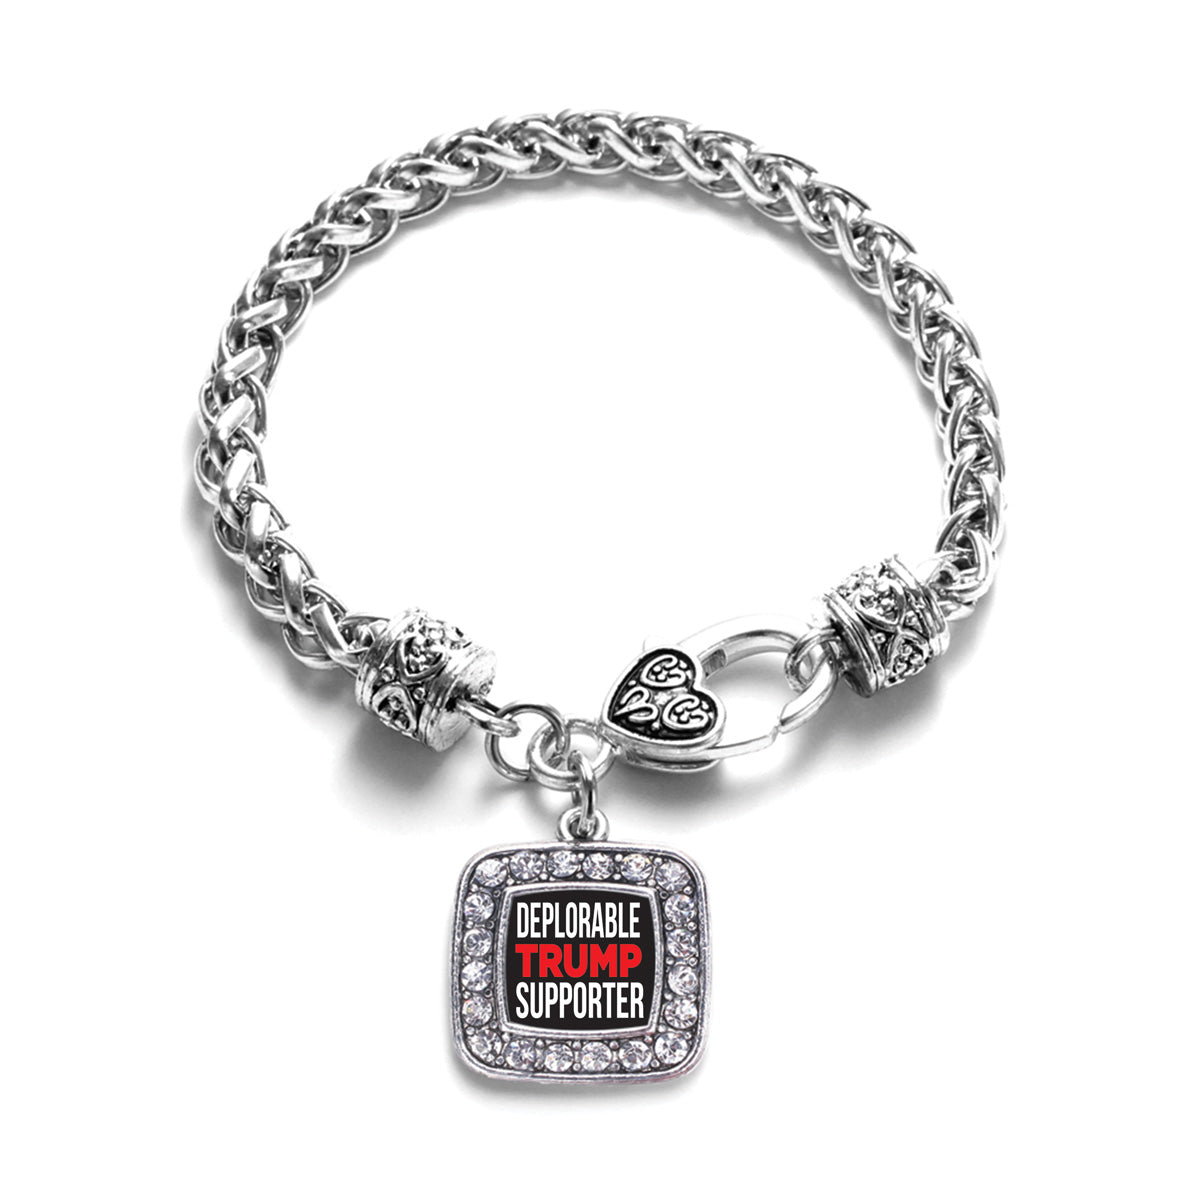 Silver Deplorable Trump Supporter Square Charm Braided Bracelet